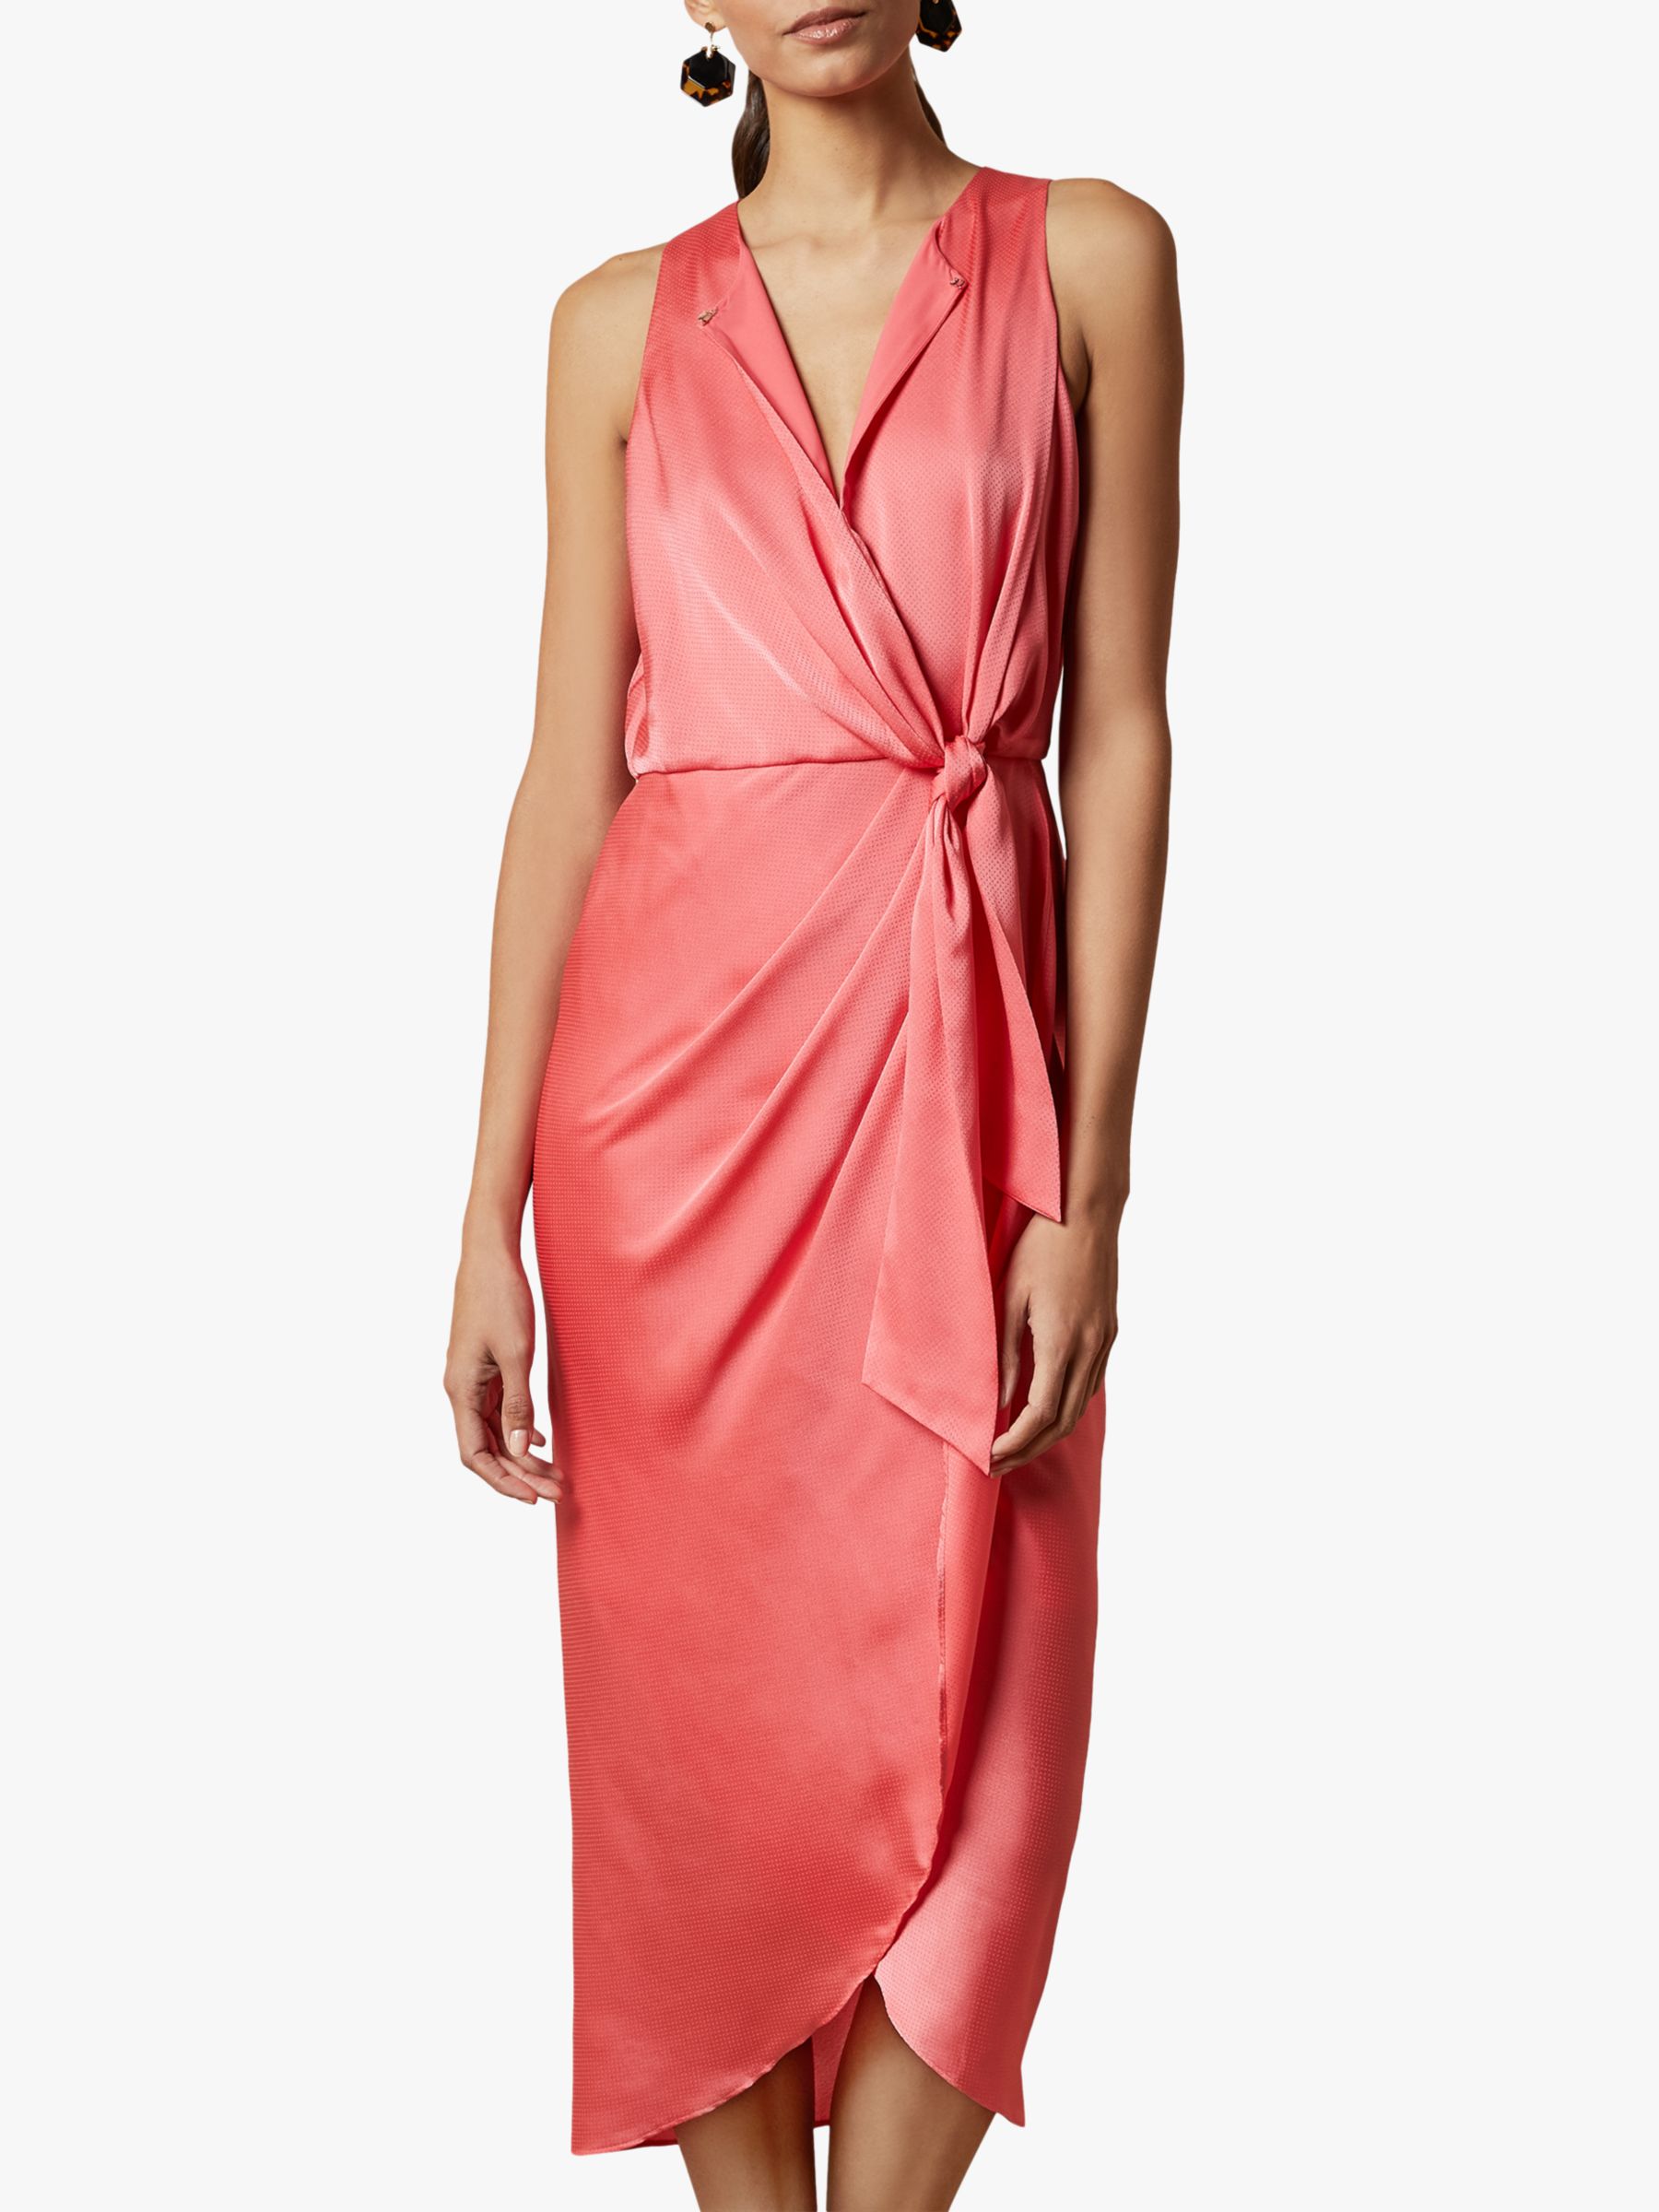 ted baker pink and red dress